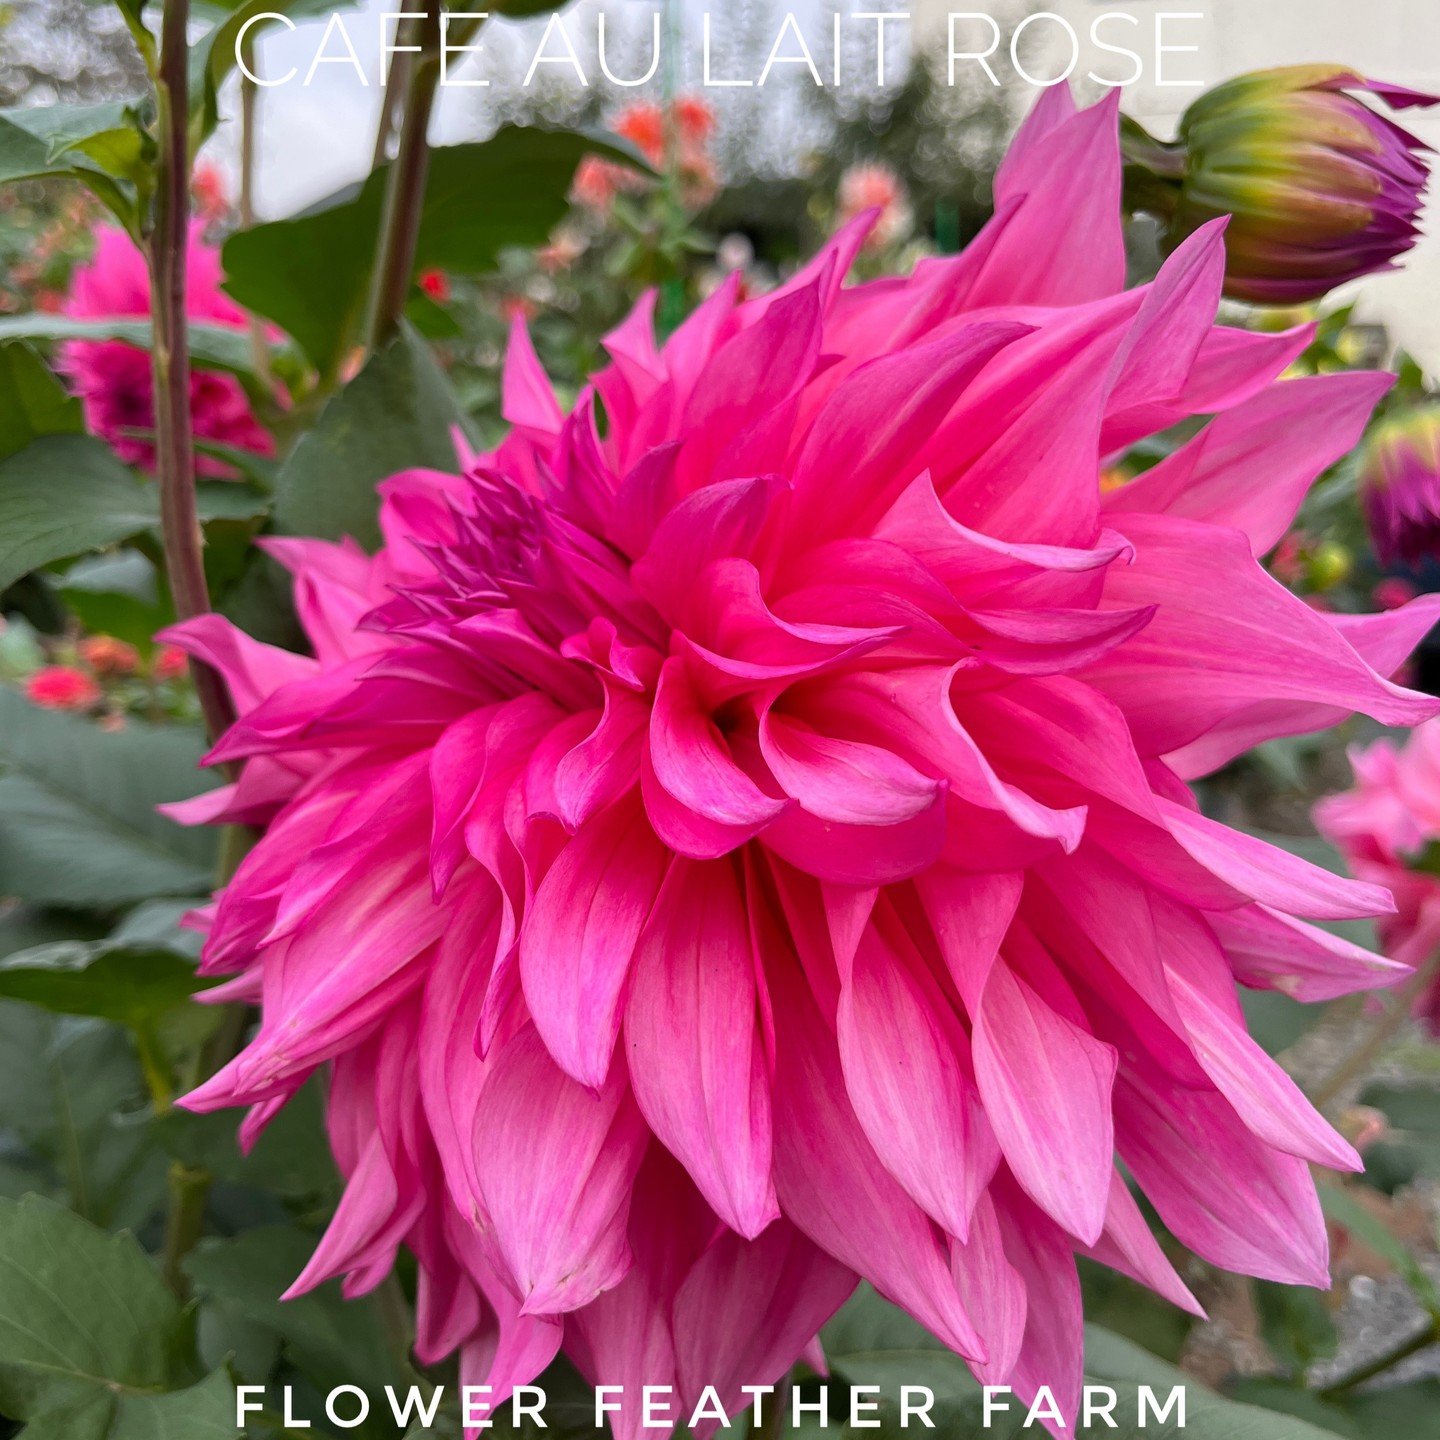 All the beauty of the Cafe Lait in a rosy pink version: dark rosy pink center which fades to pale pink at the tips.

Bloom Size: 8-10 inches; Height: 3-4 feet tall

#dahlia #cafeaulait #dahliatubers